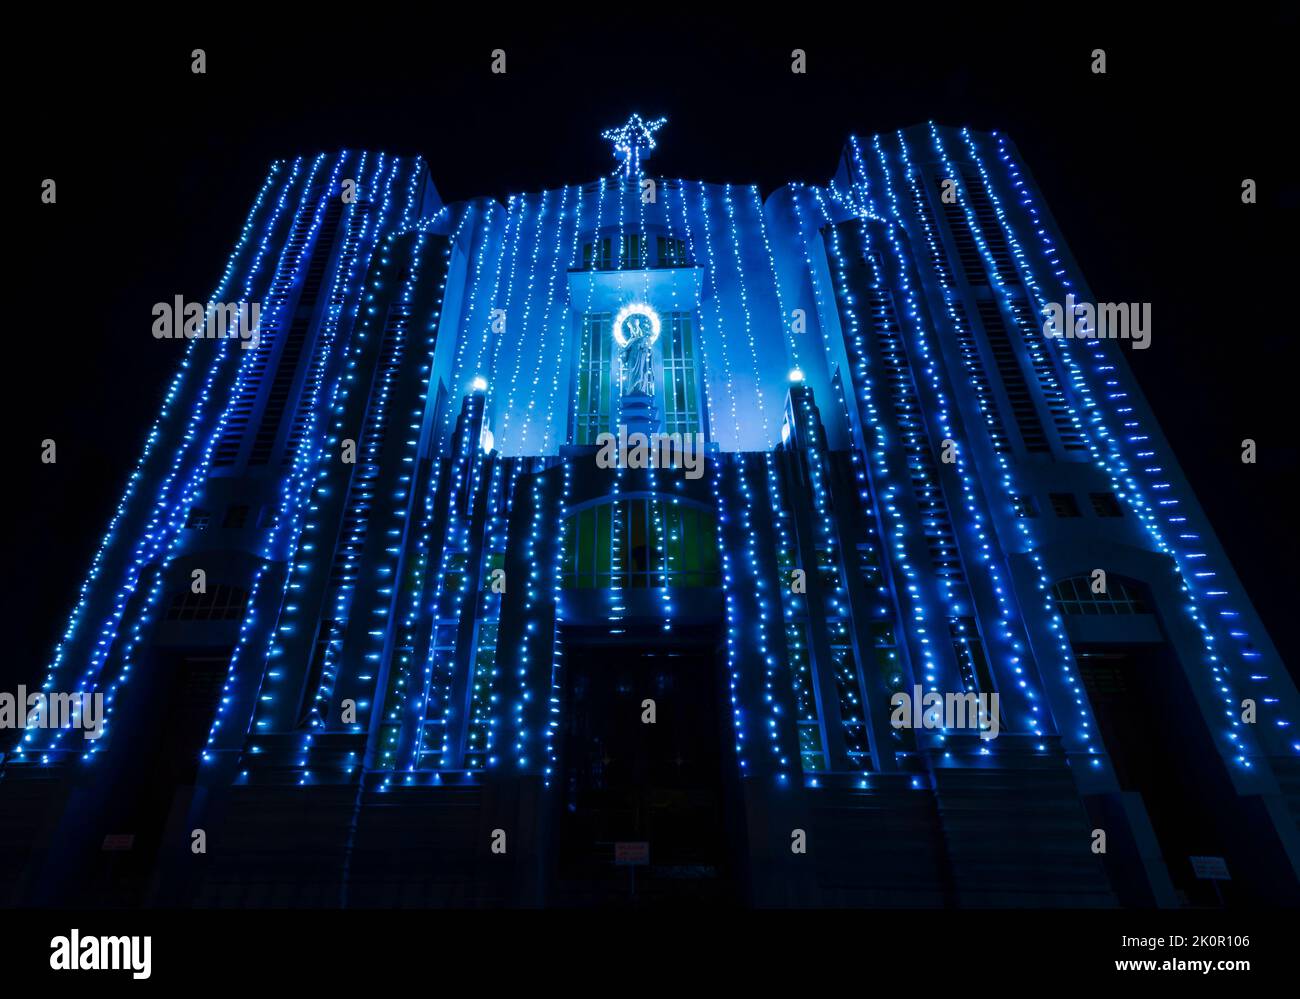 The Cathedral of Mary Help of Christians in Shillong, Meghalaya, India, decorated with fluorescent lights for the Christmas season. Stock Photo